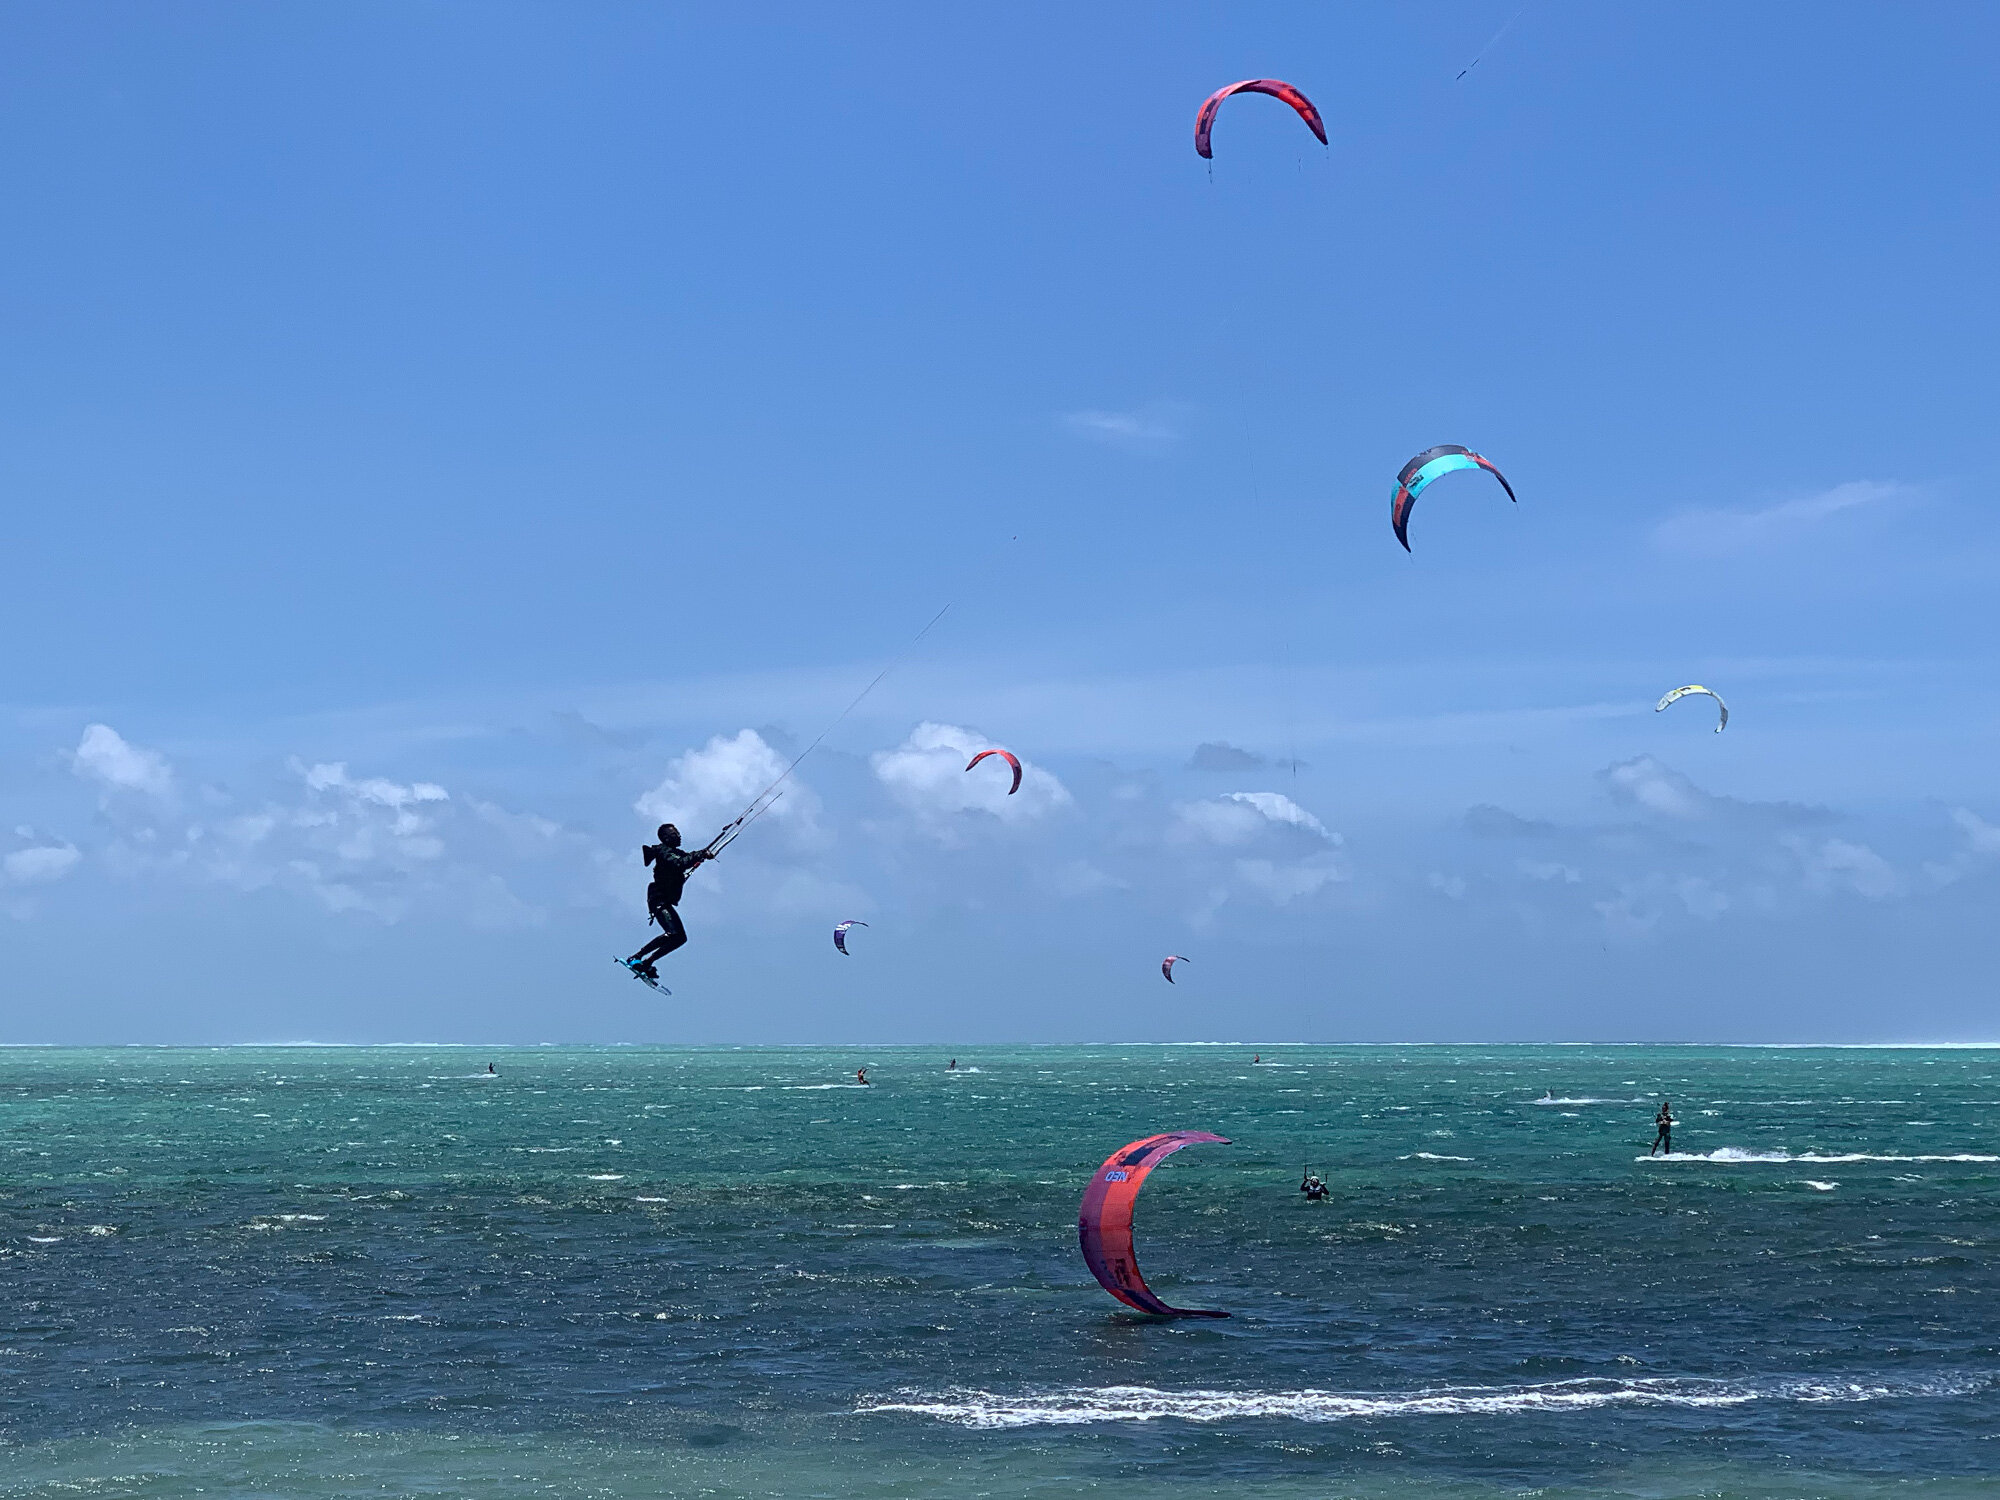 Feeling inspired by kite surfing while on honeymoon in Mauritius